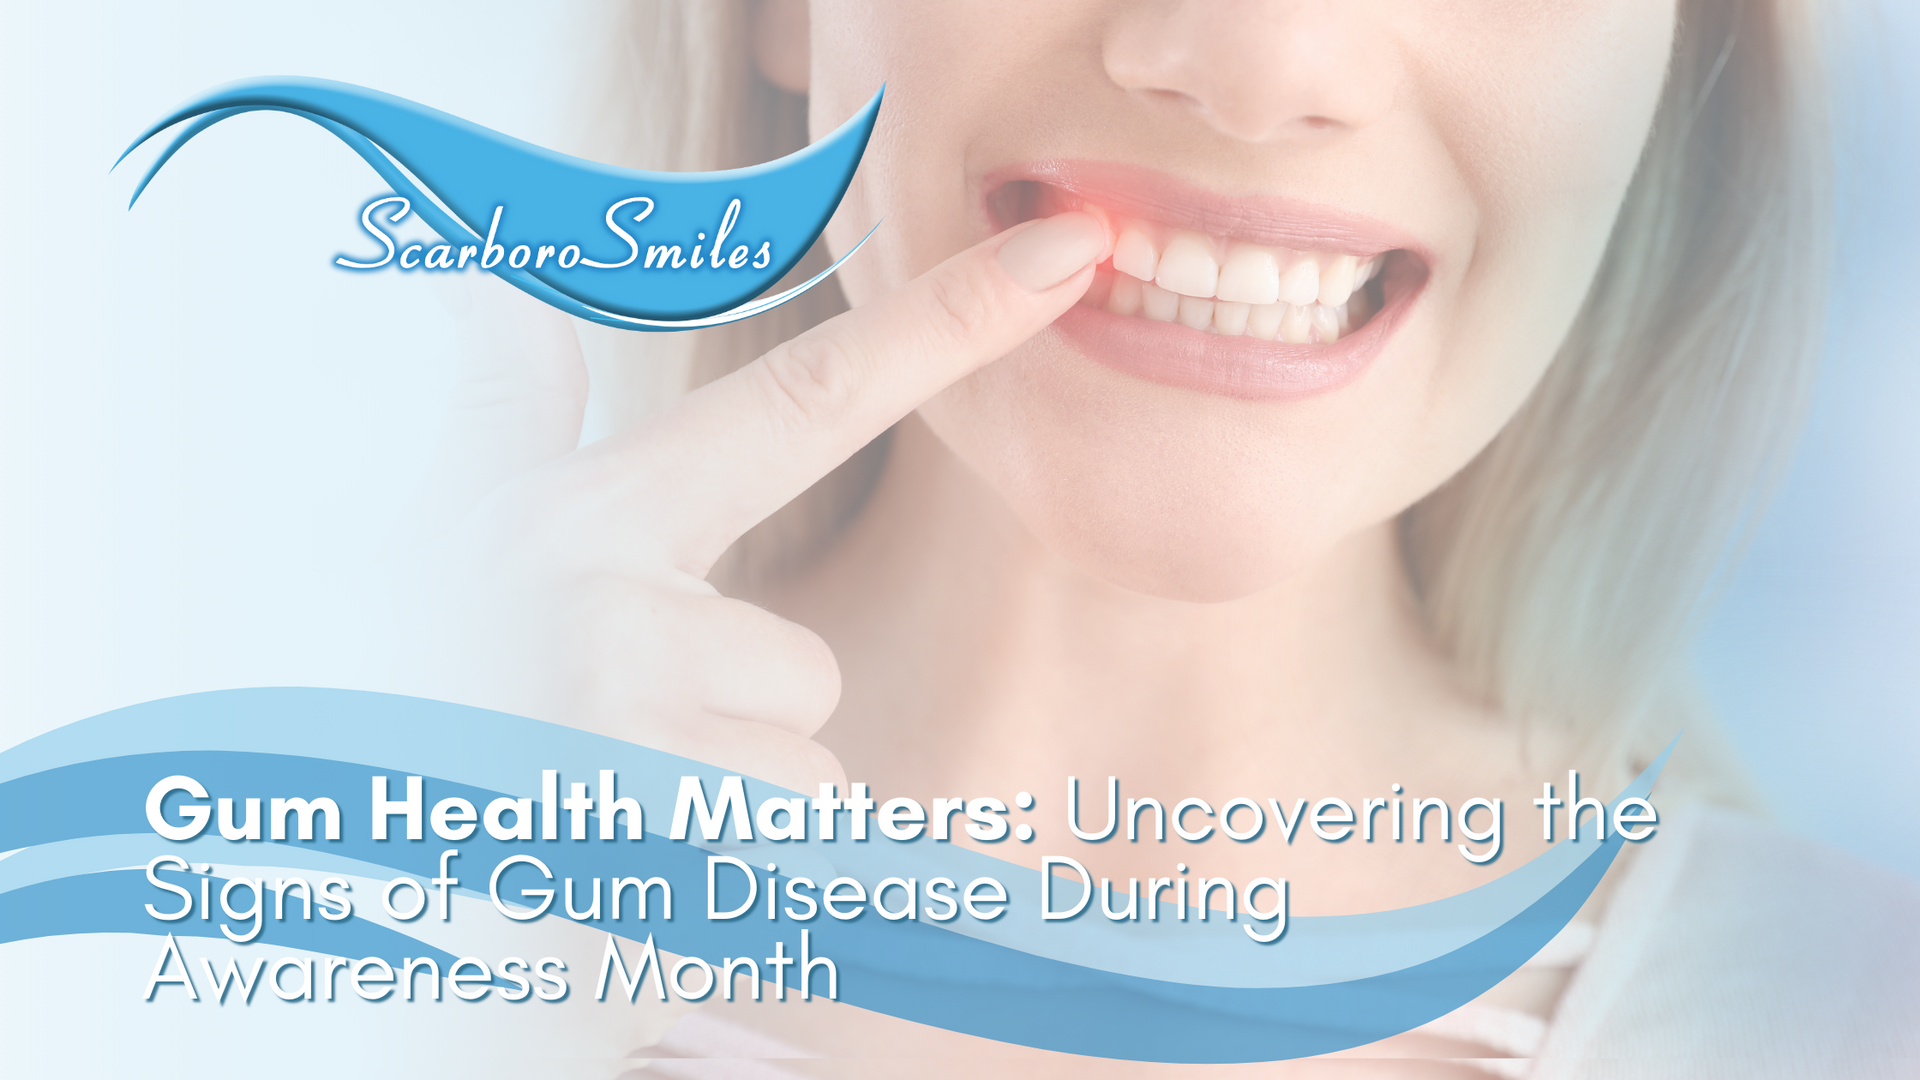 gum health matters : uncovering the signs of gum disease during awareness month